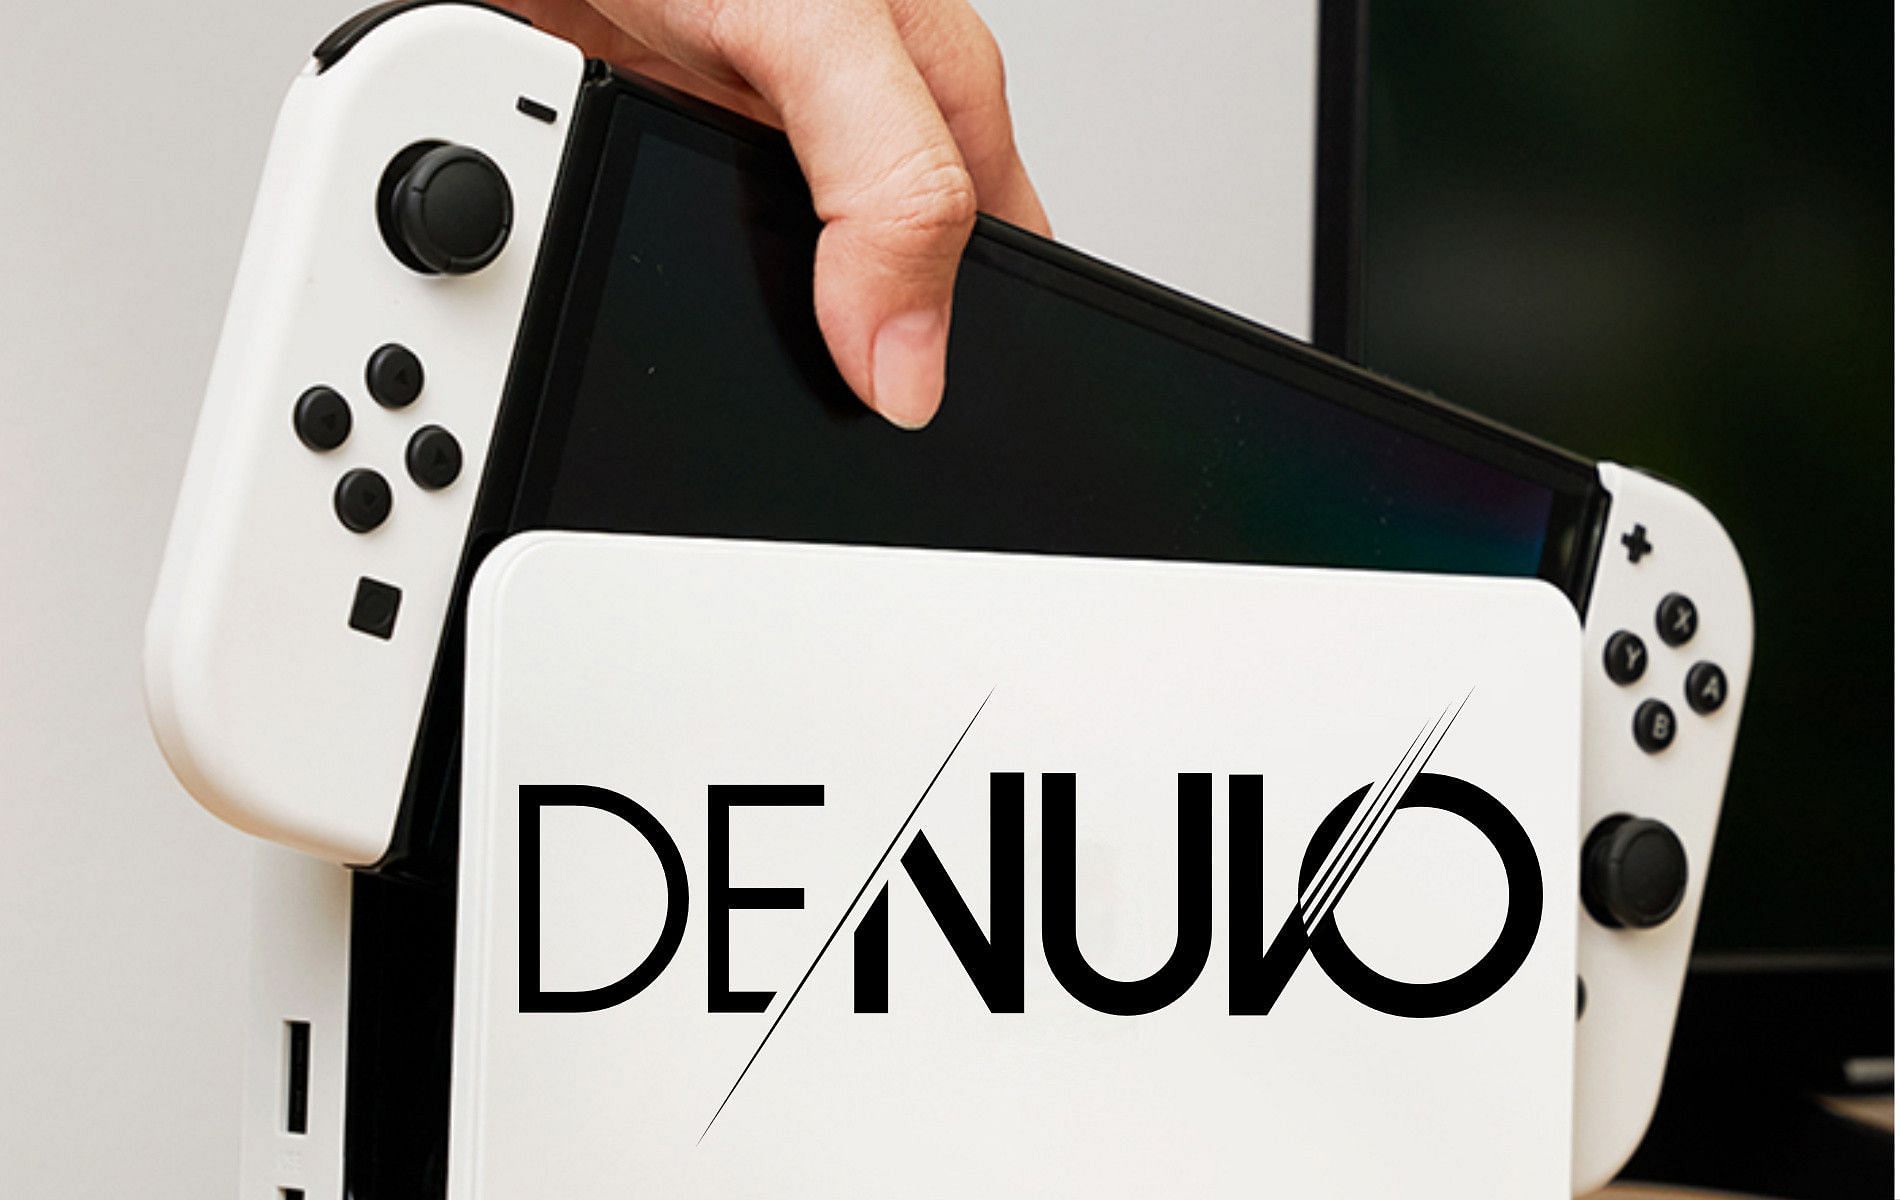 Cover art featuring Nintendo Switch OLED model with Denuvo logo